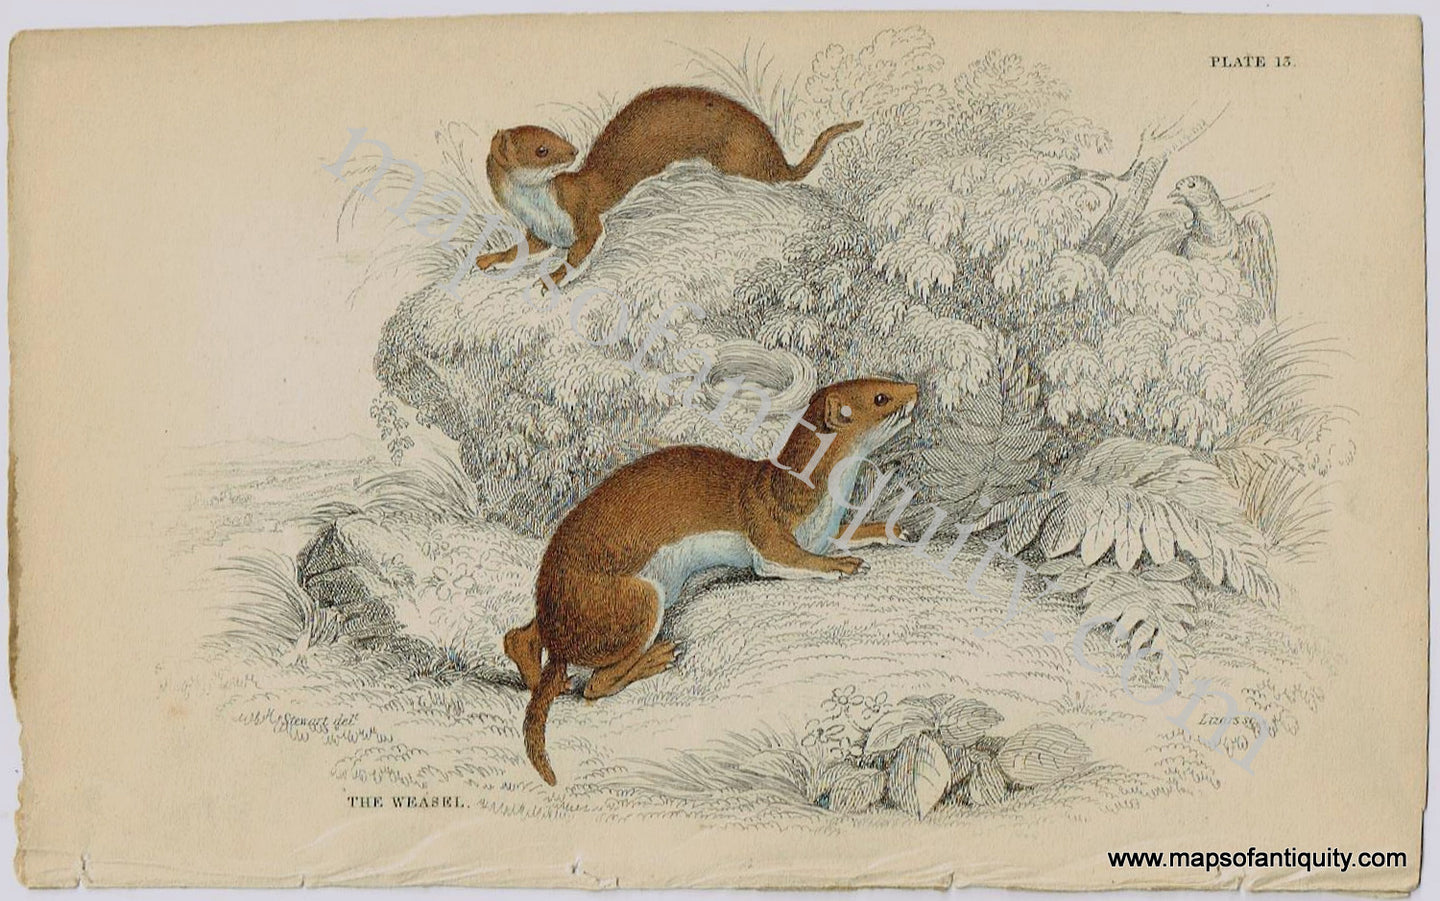 Antique-Print-Prints-Illustration-Illustrated-Plate-15-The-Weasel-weasels-William-Jardine-Jardine's-Naturalist's-Library-Natural-History-Animals-1840s-1800s-Early-Mid-19th-Century-Maps-of-Antiquity